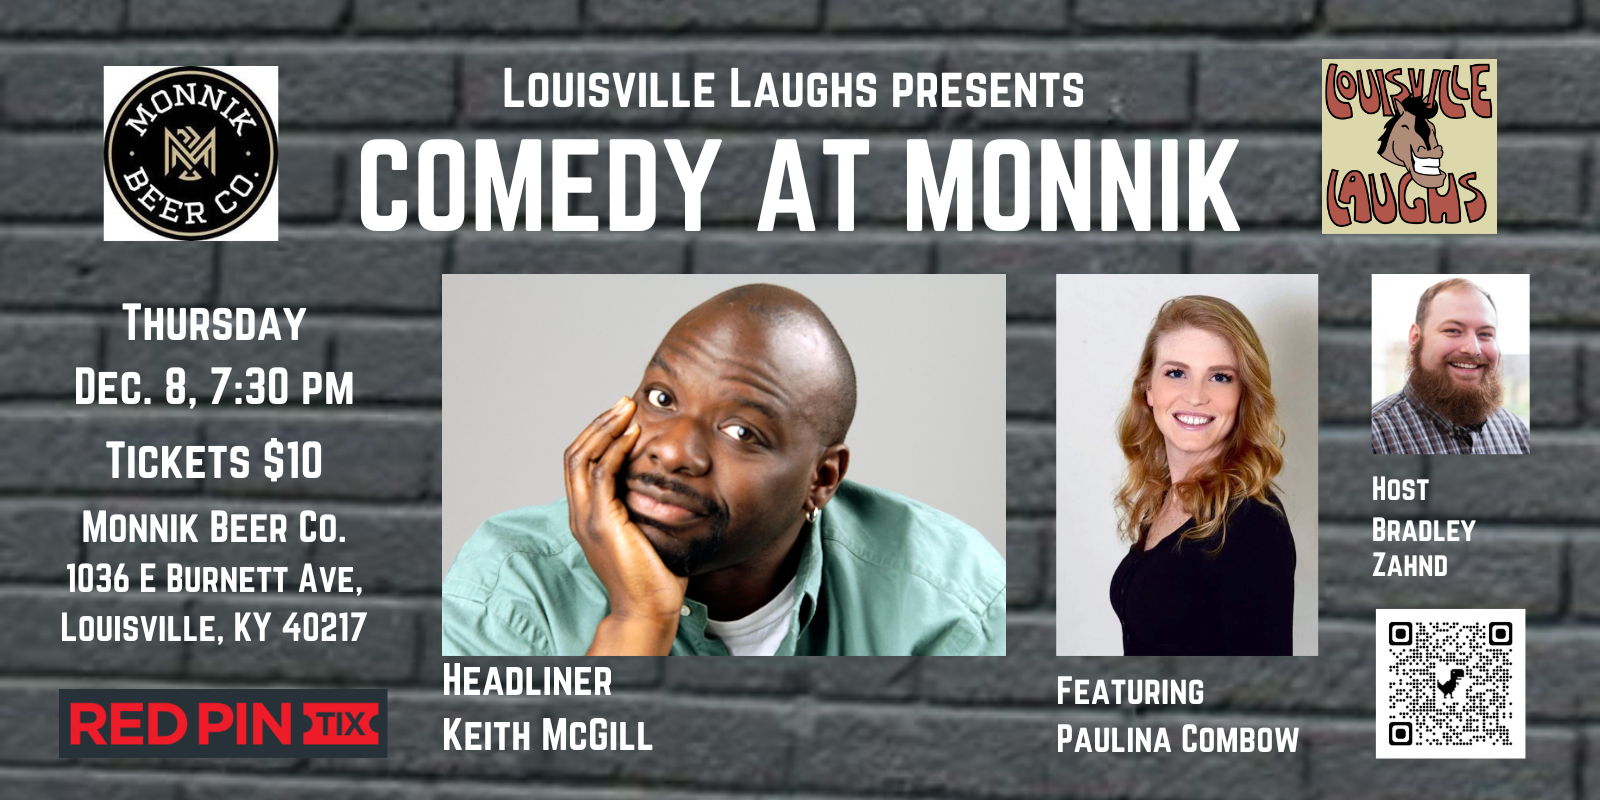 Comedy at Monnik promotional image